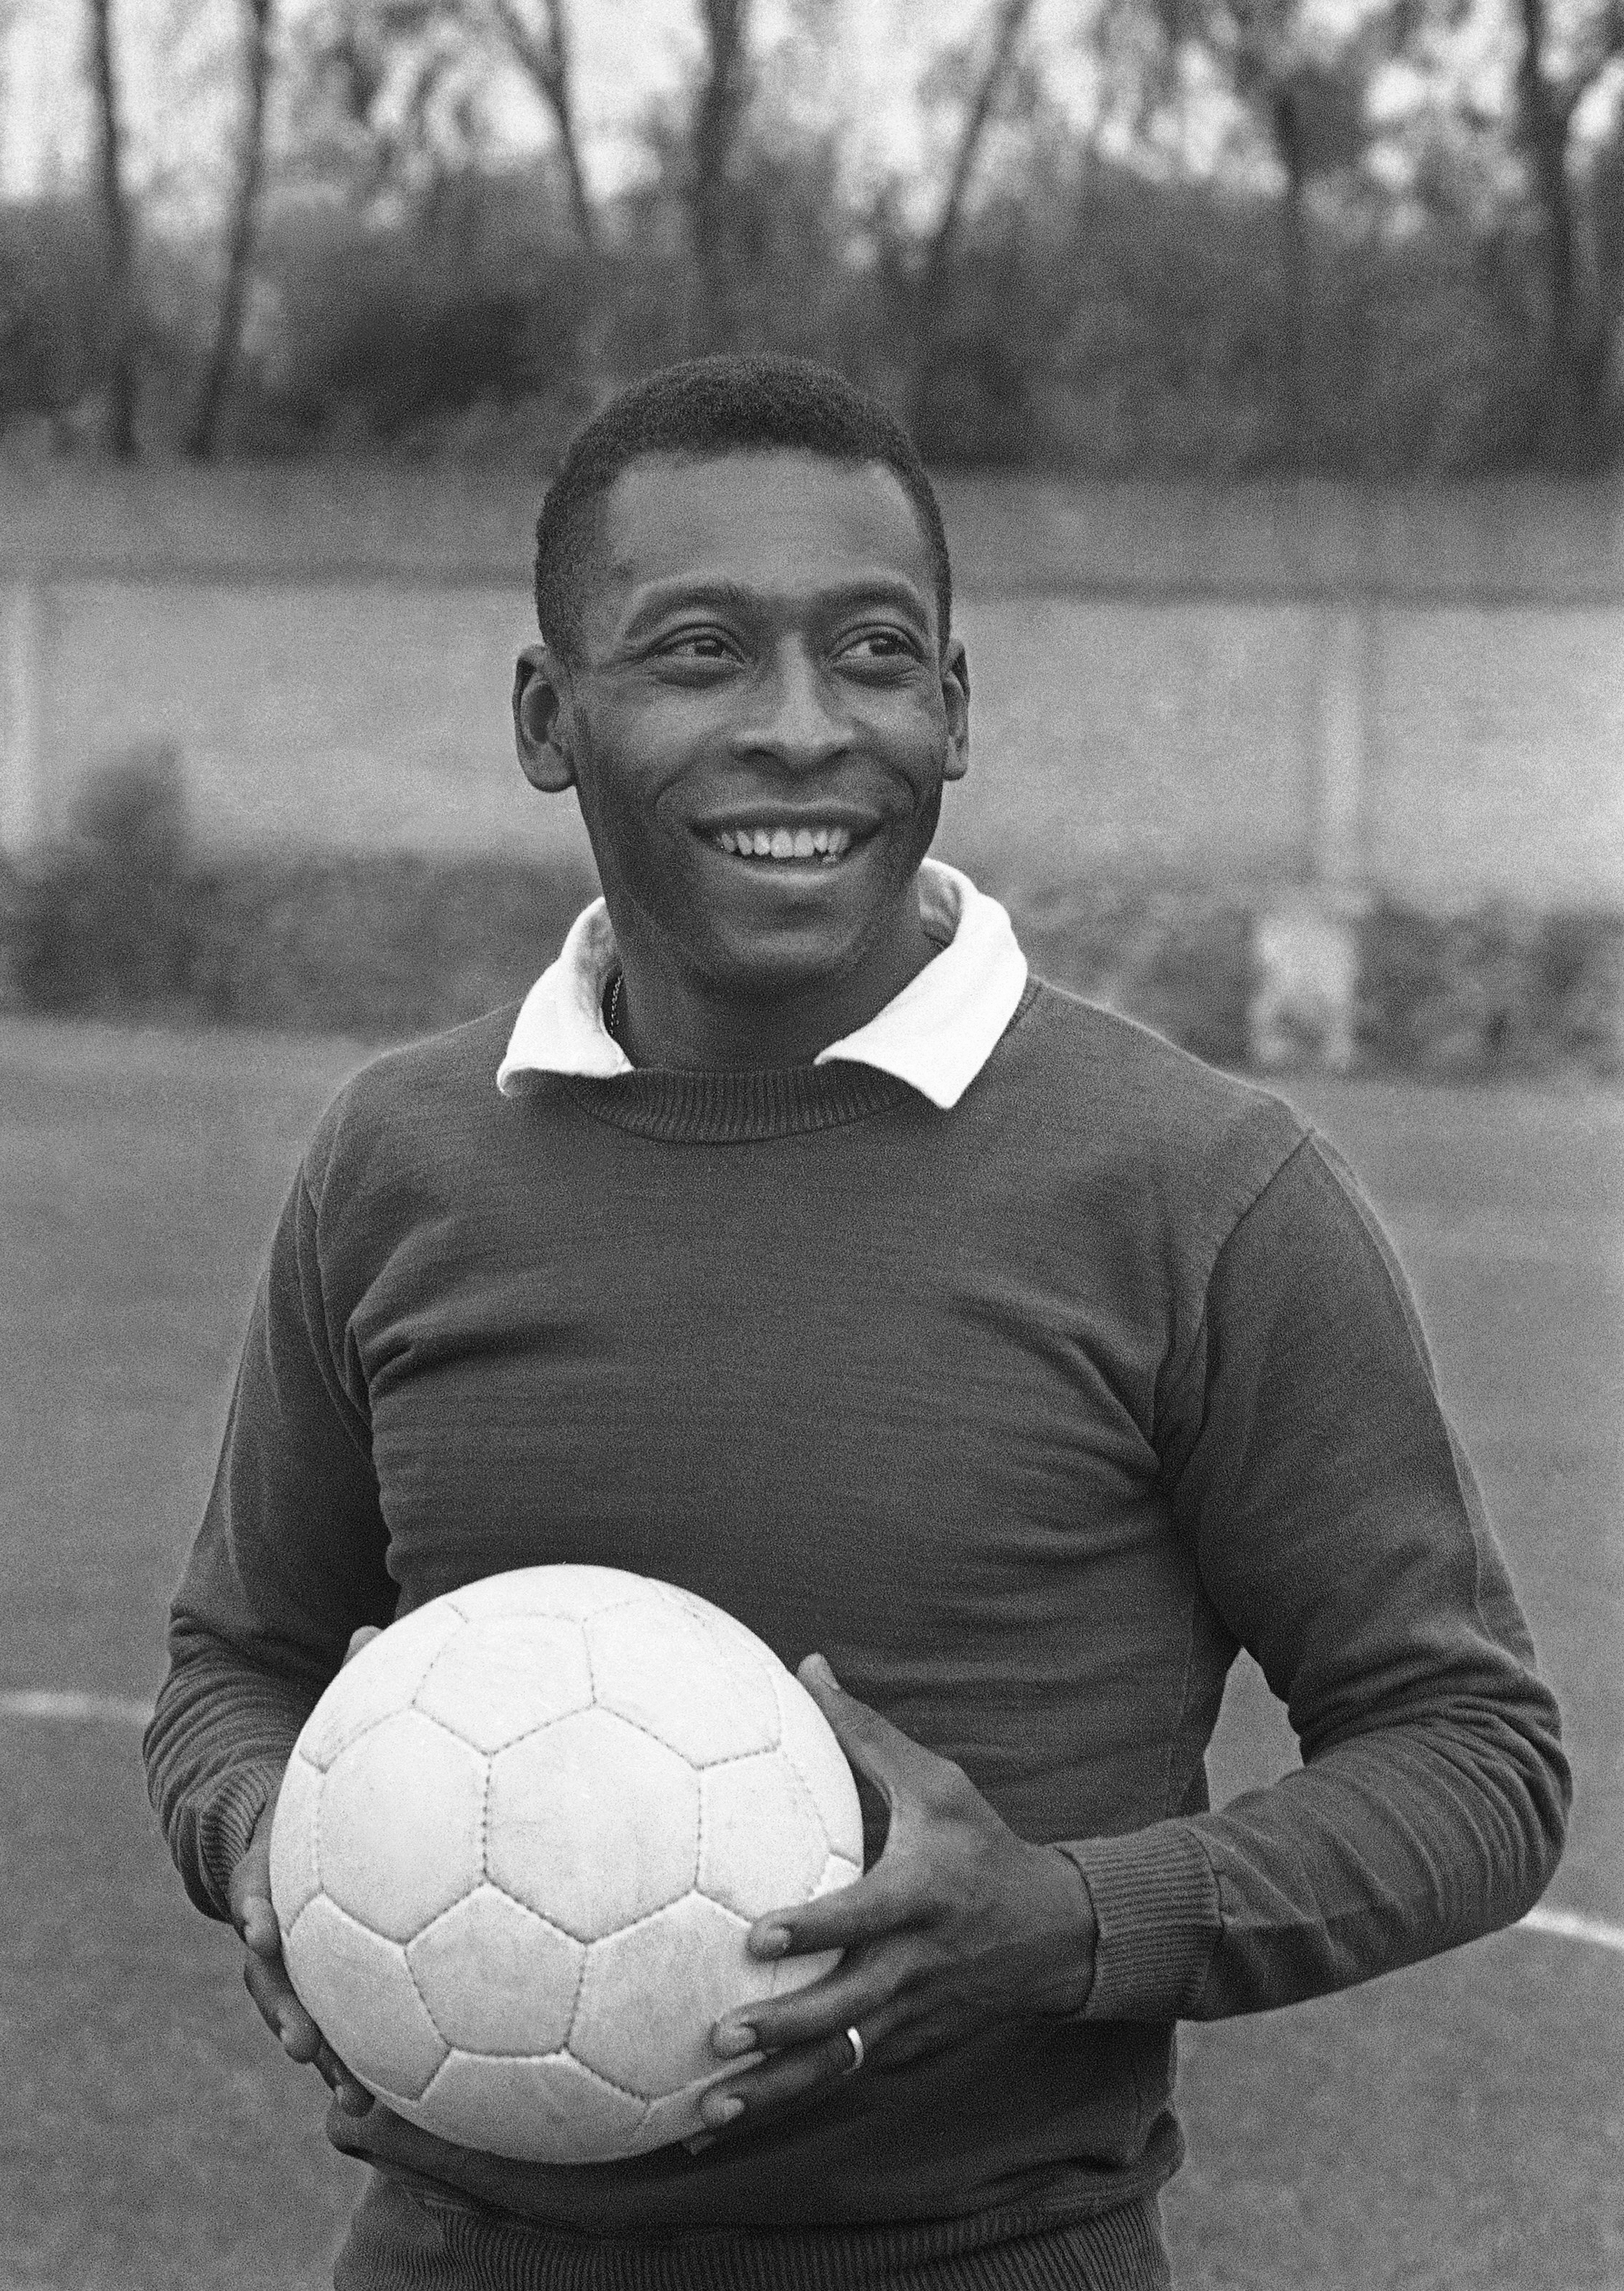 Pele, One Of The Greatest Players Ever To Grace The Sport Of Football, And Labeled The Greatest By FIFA, Unknown Date But Likely In The Late 50's Early 60's